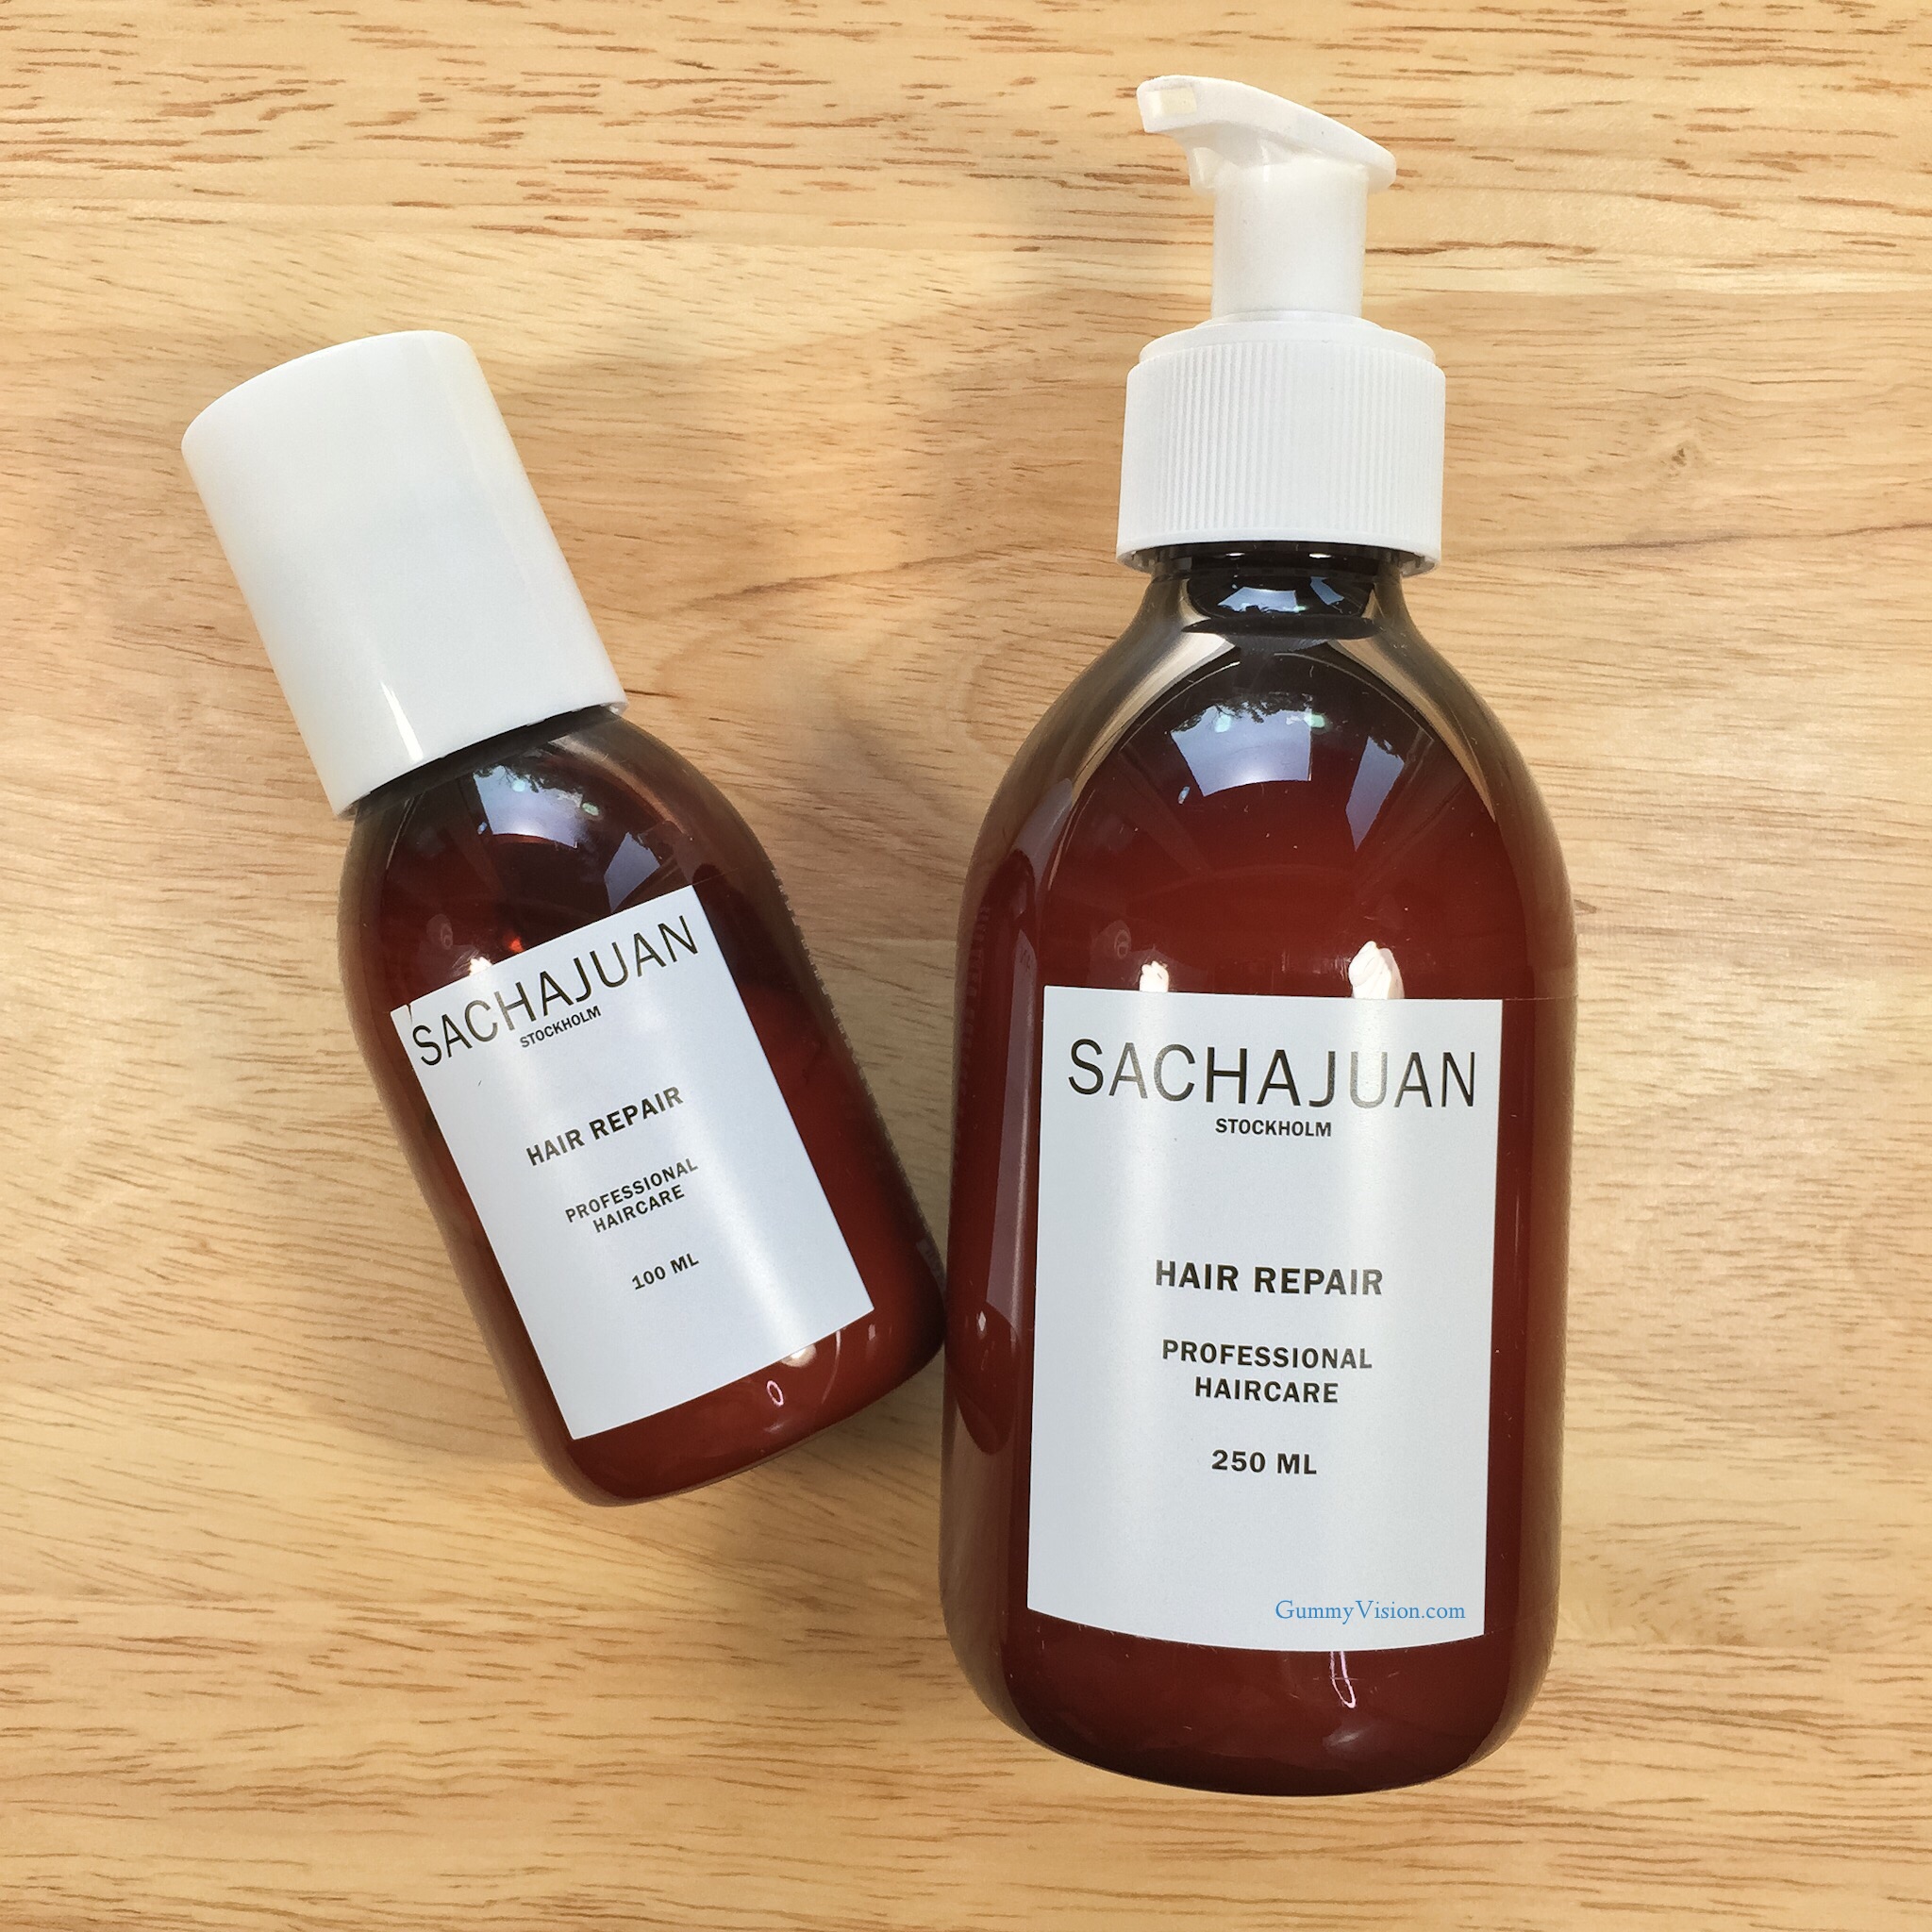 Mini Reviews: Sachajuan Hair Repair and Goldfaden MD Hands To Heart  Anti-Aging + Brightening Hand Treatment — Grey to Z